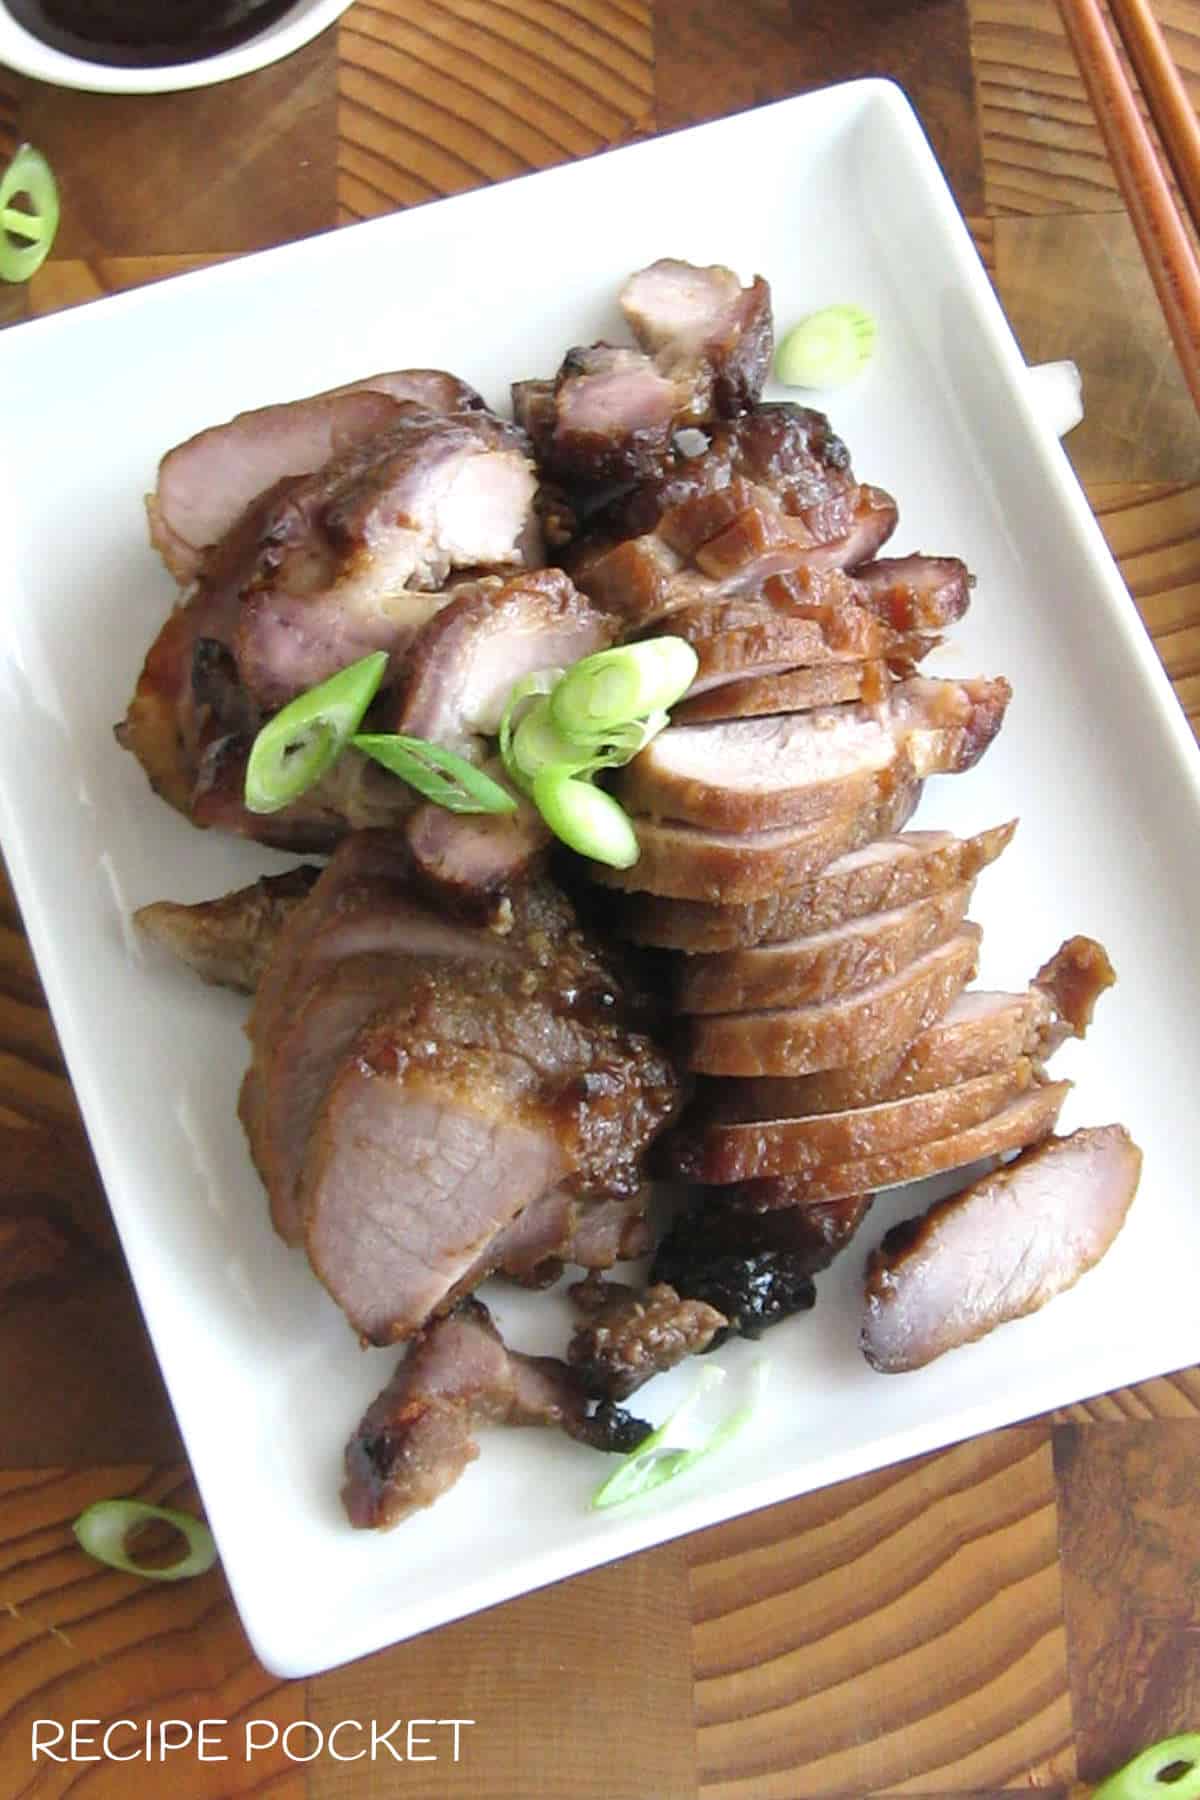 Slices of barbeque pork on a white plate.